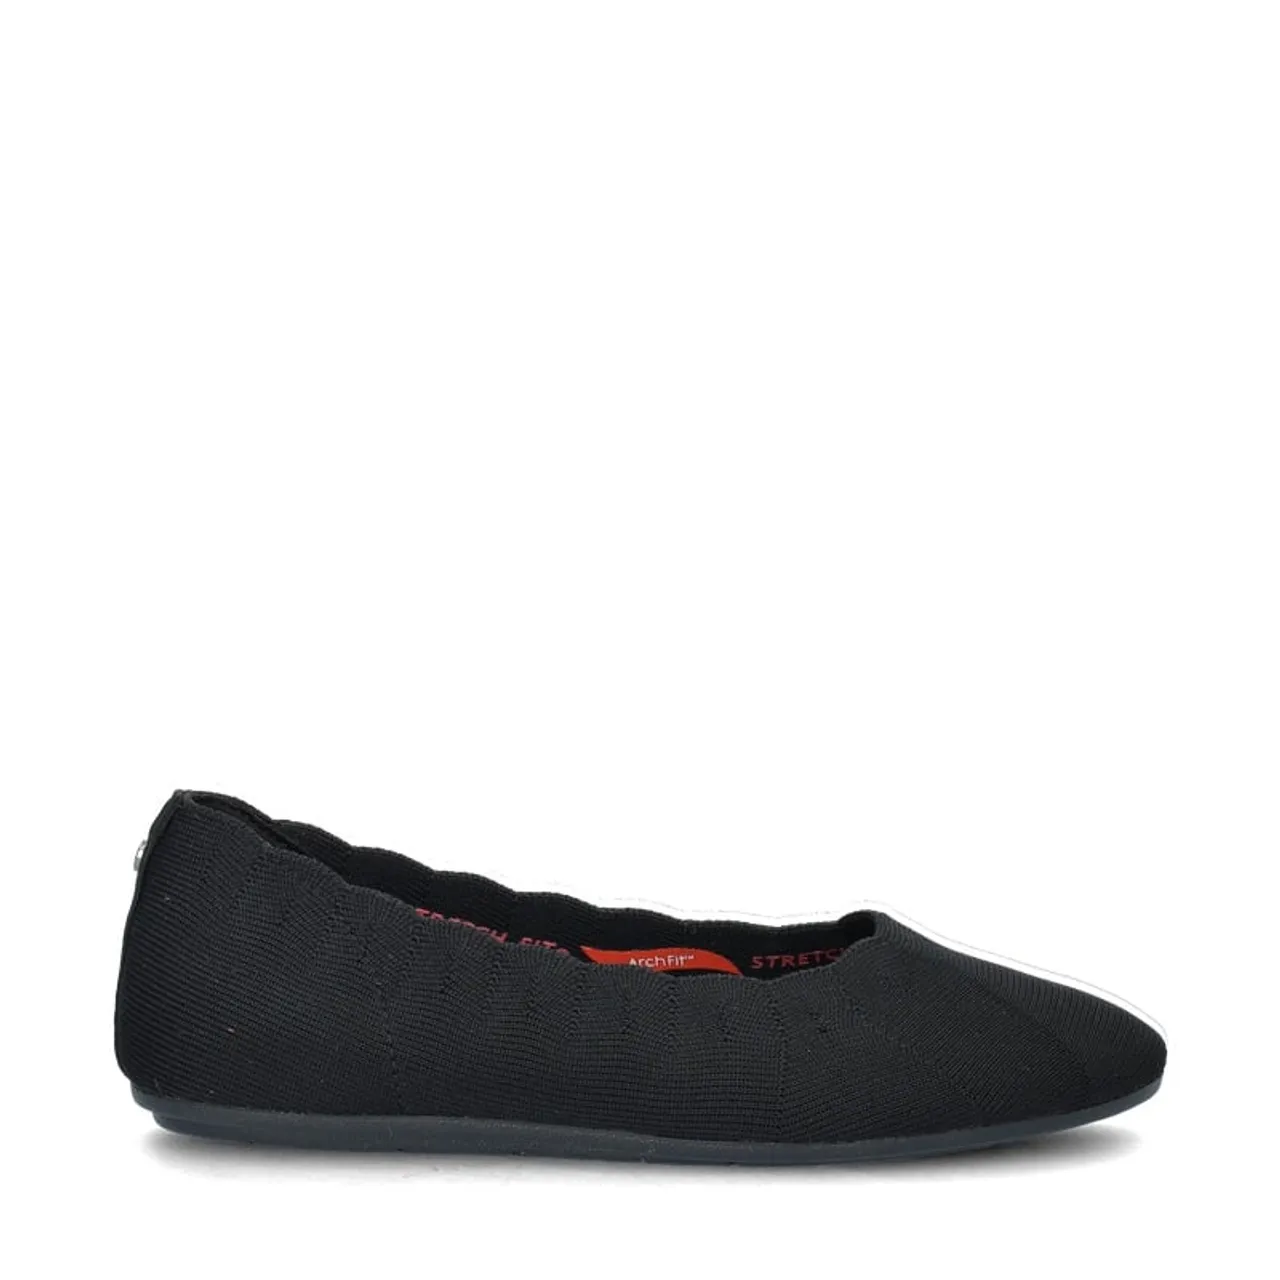 Skechers Cleo Arch Fit ballerinas & instappers